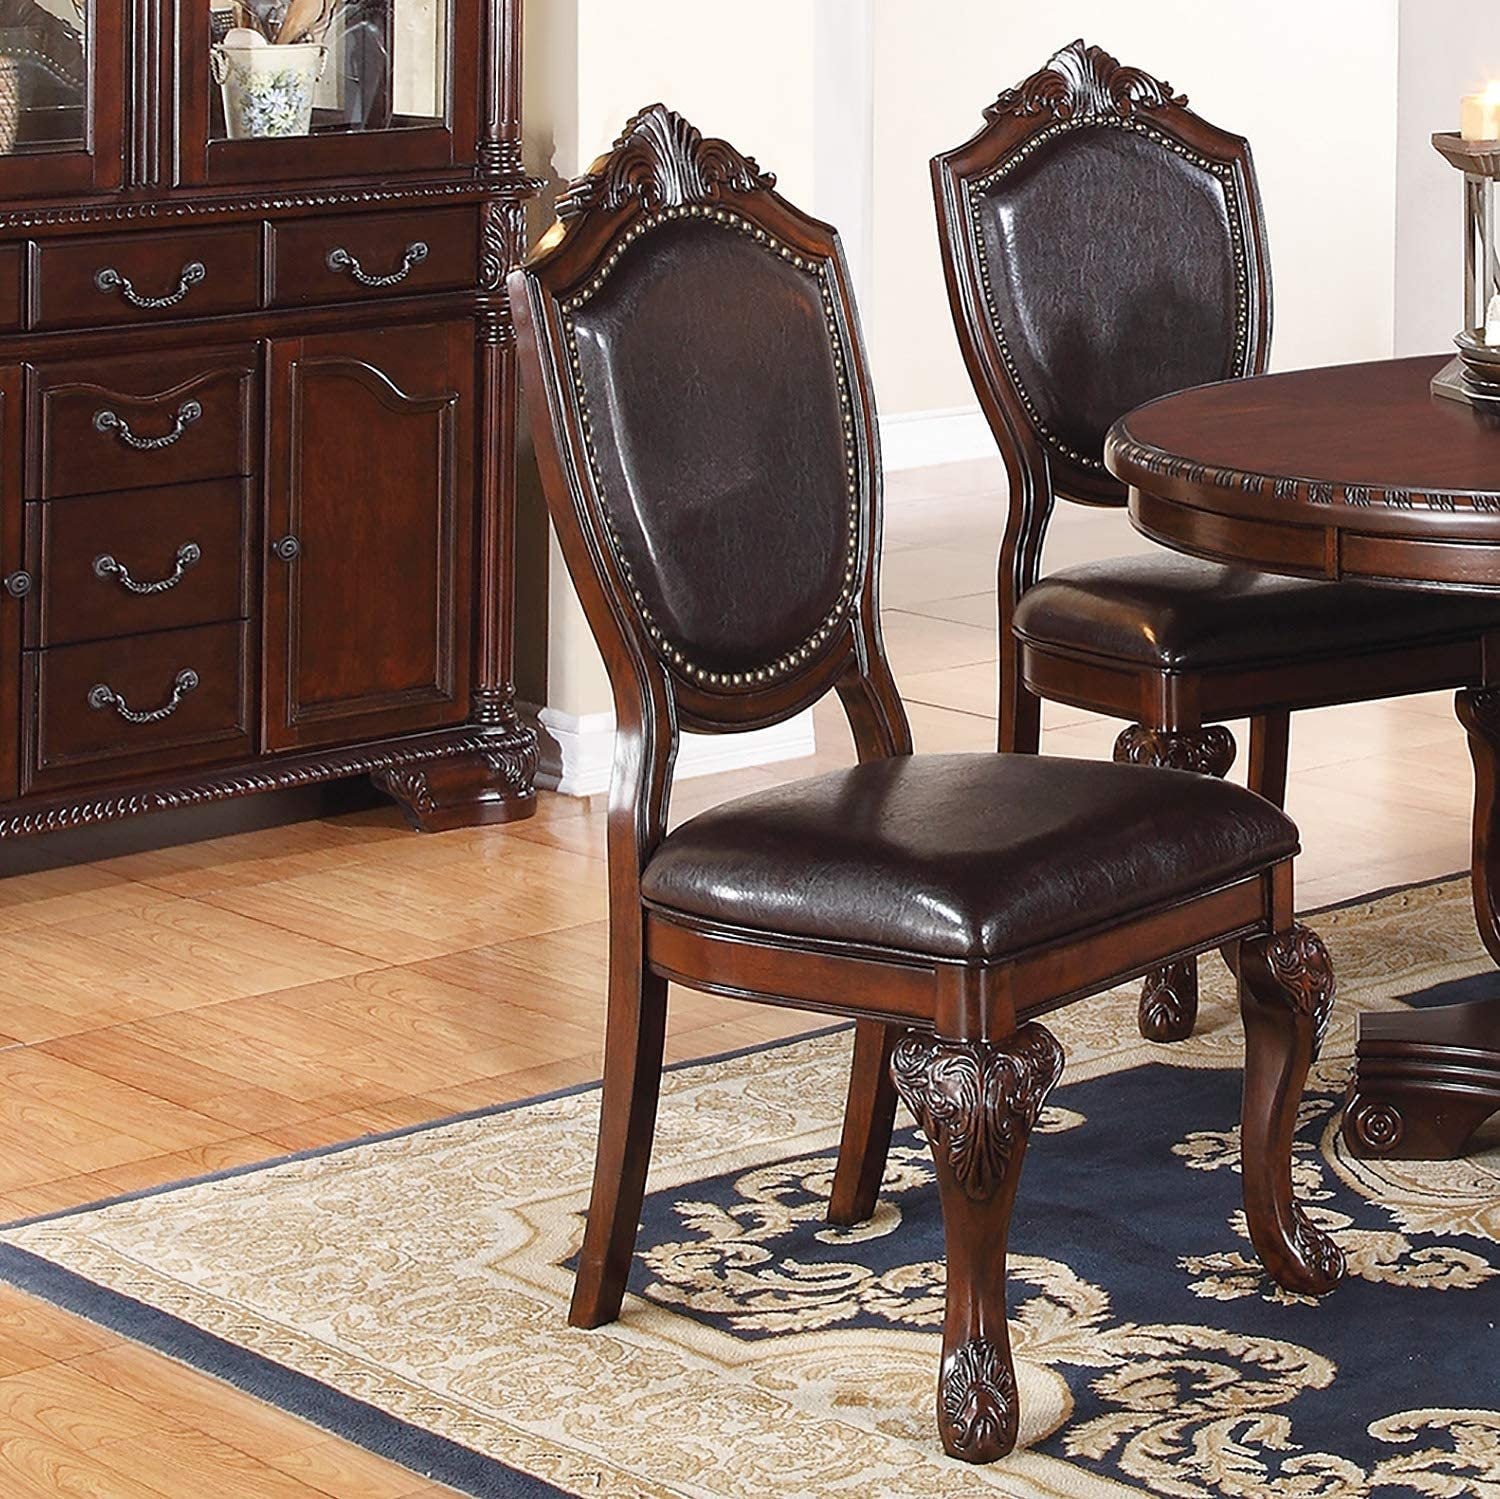 Royal Majestic Formal Set of 2 Side Chairs Brown Color